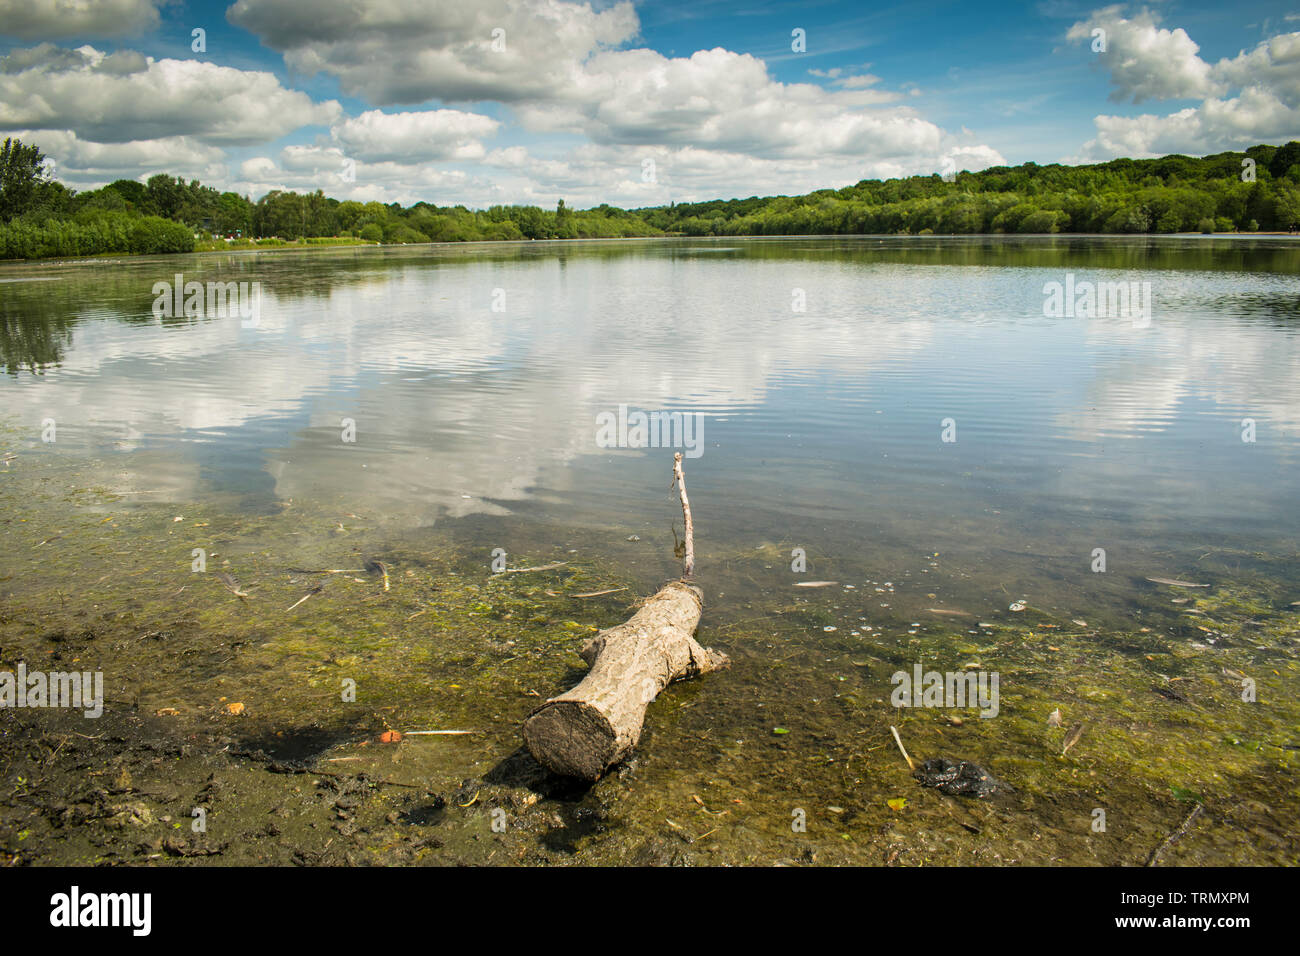 Still waters of Ruislip Lido with washed up log surrounded by green trees, with a cloudy blue sky. London nature reserve. Stock Photo